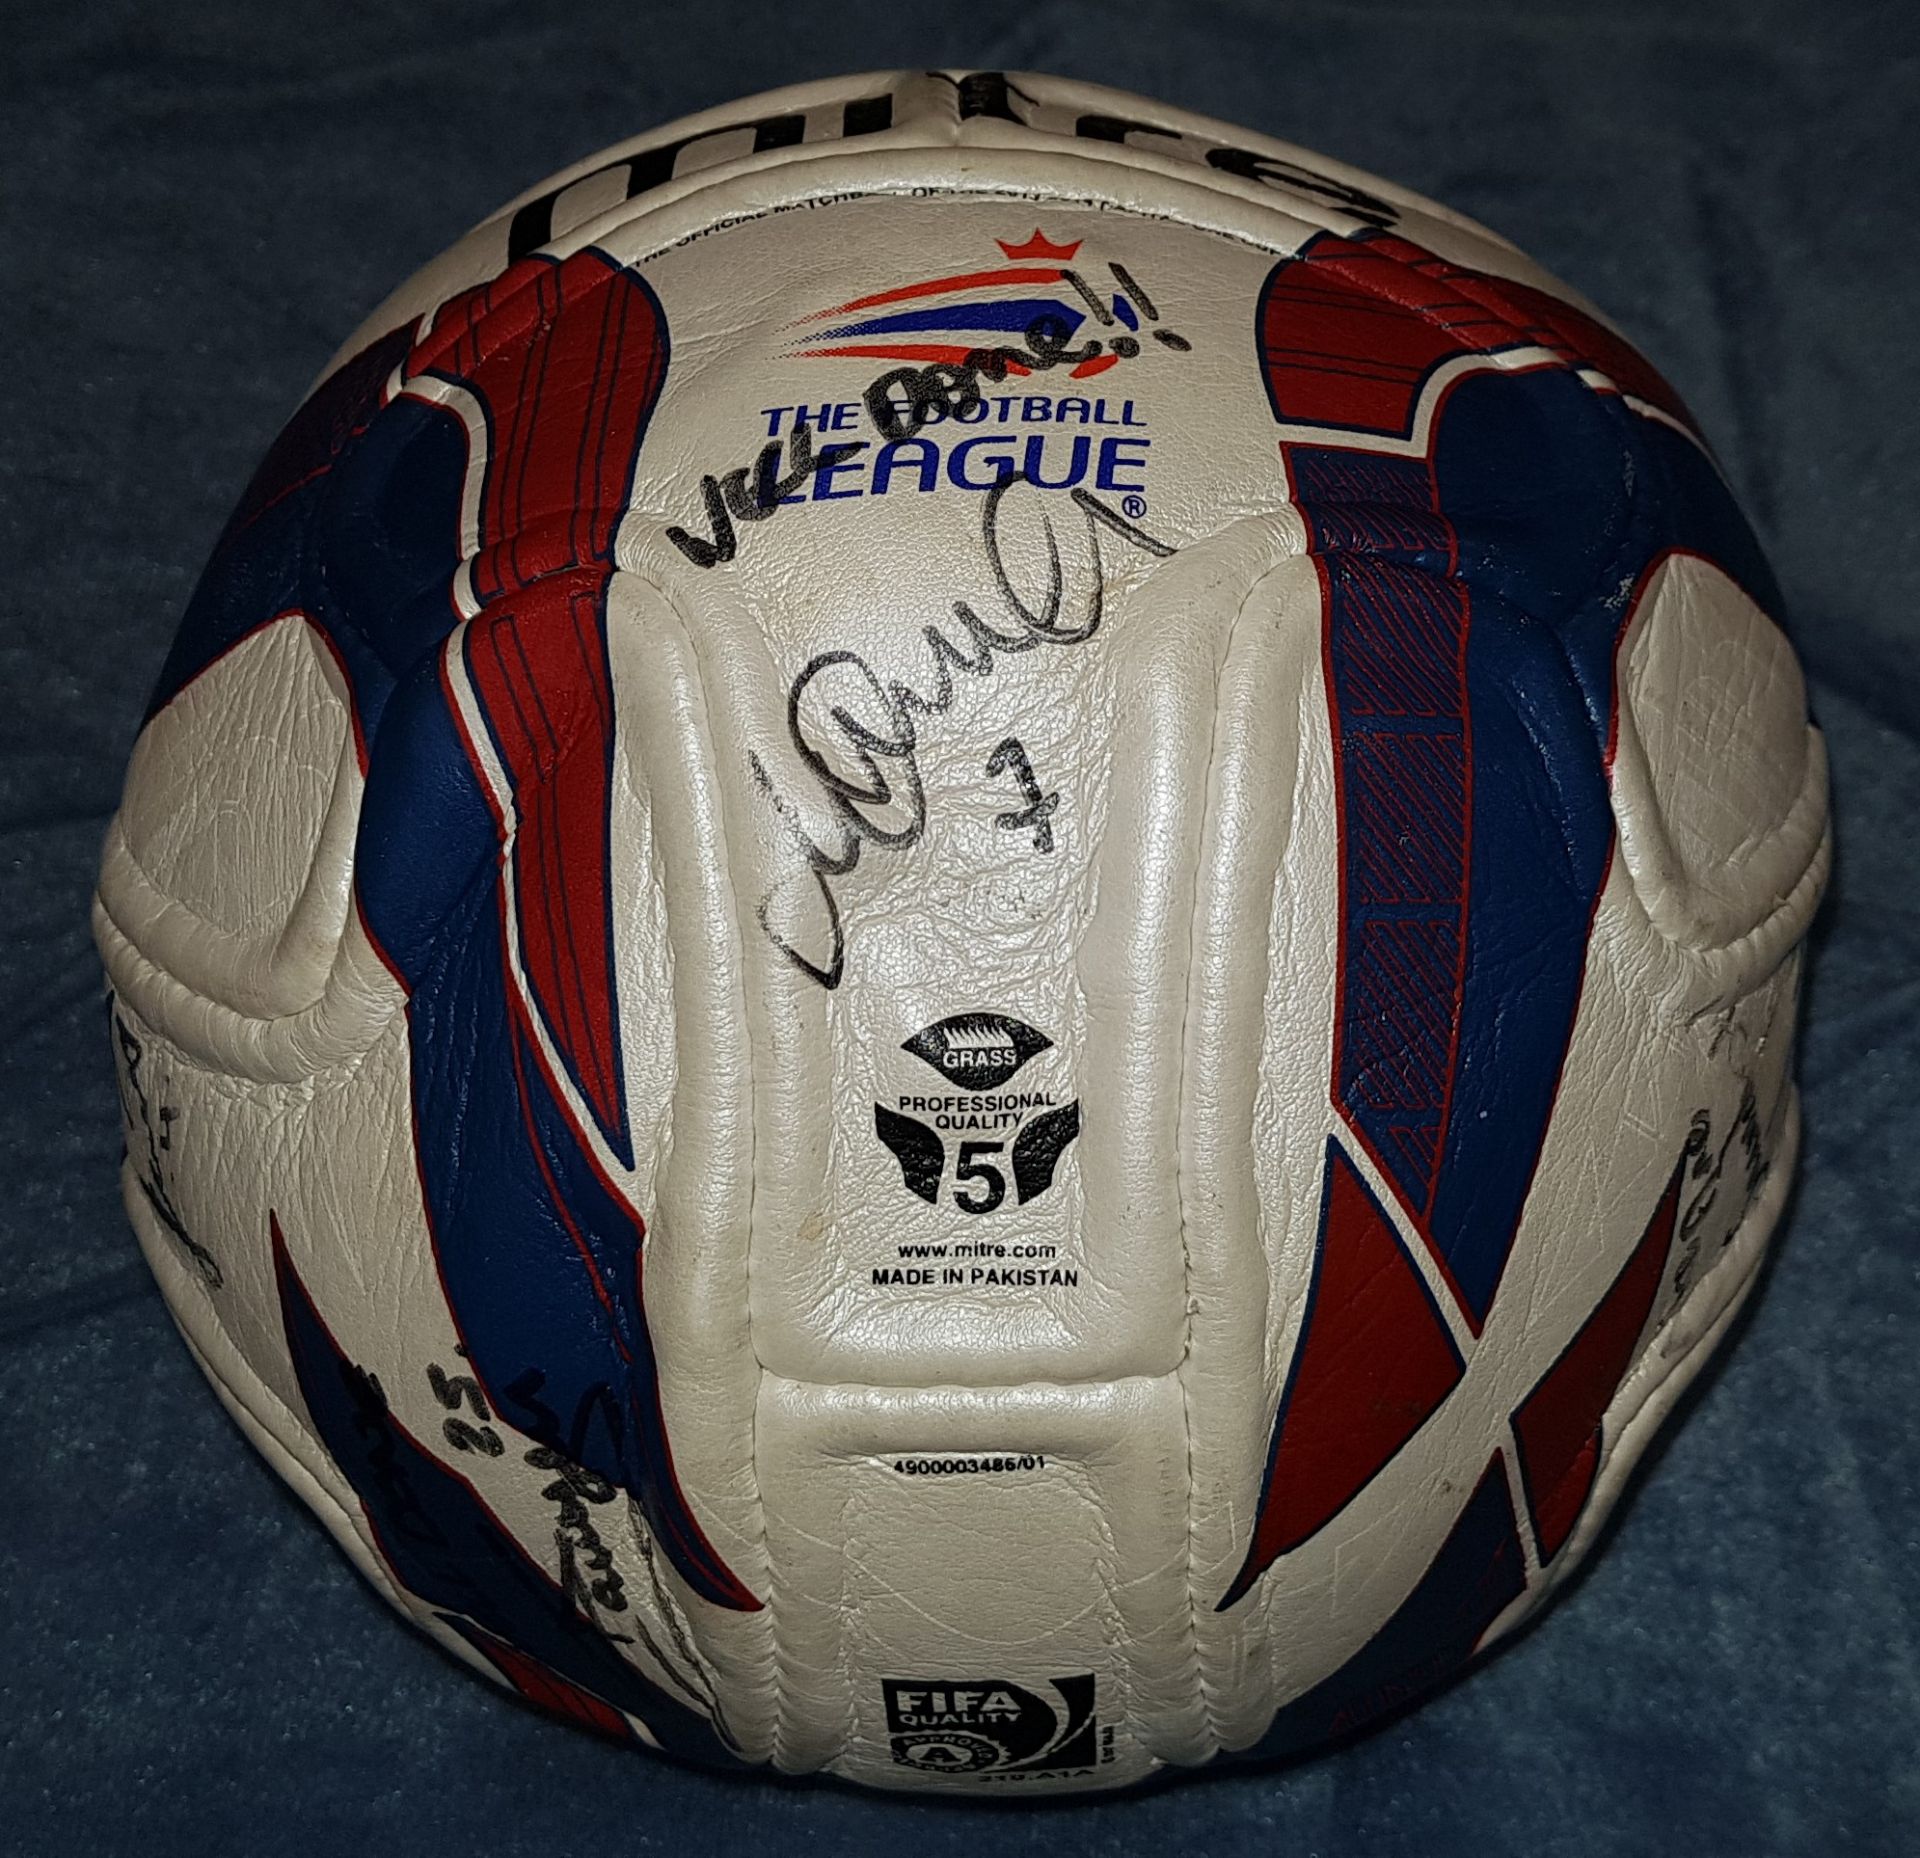 MITRE SIZE 5 FOOTBALL FIFA QUALITY CAPITAL ONE CUP WITH NUMEROUS UNKNOWN SIGNATURES (SEE IMAGES)